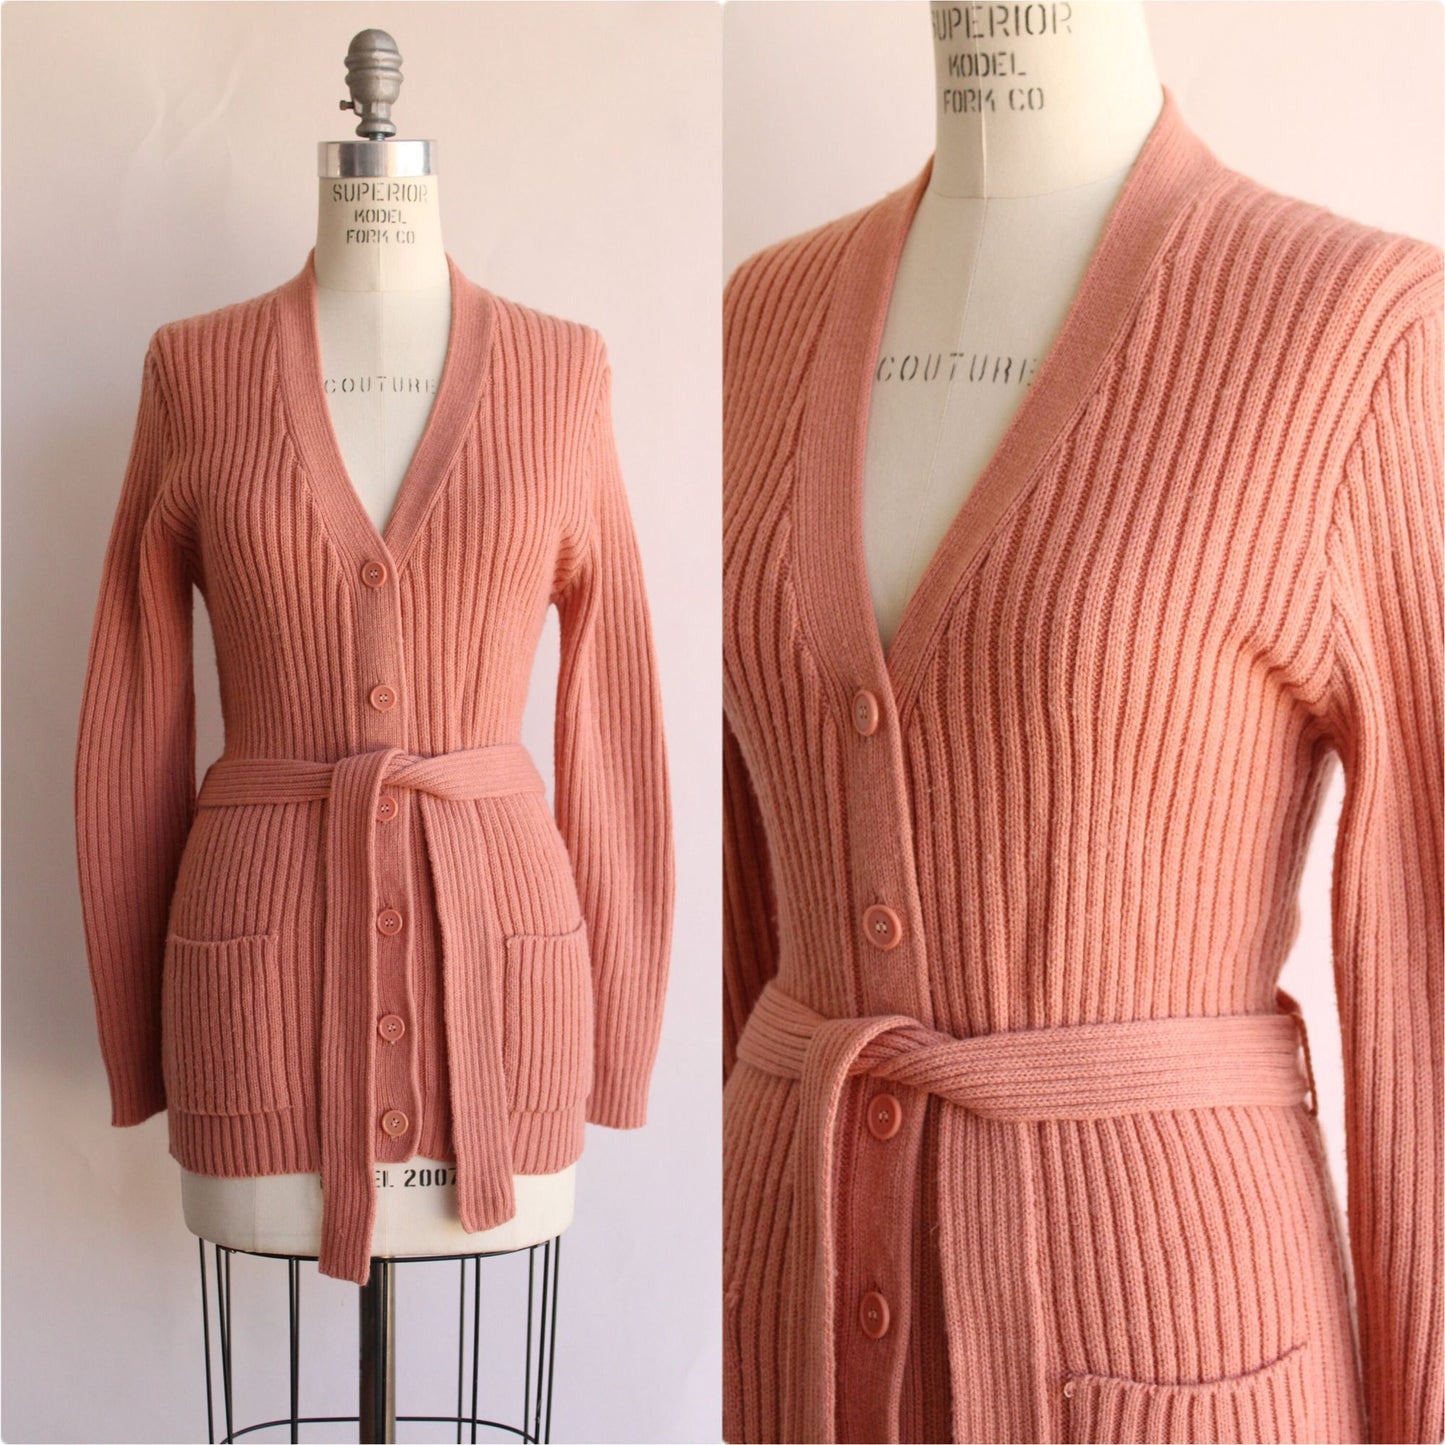 Vintage 1970s 1980s Sweater With Belt and Pockets